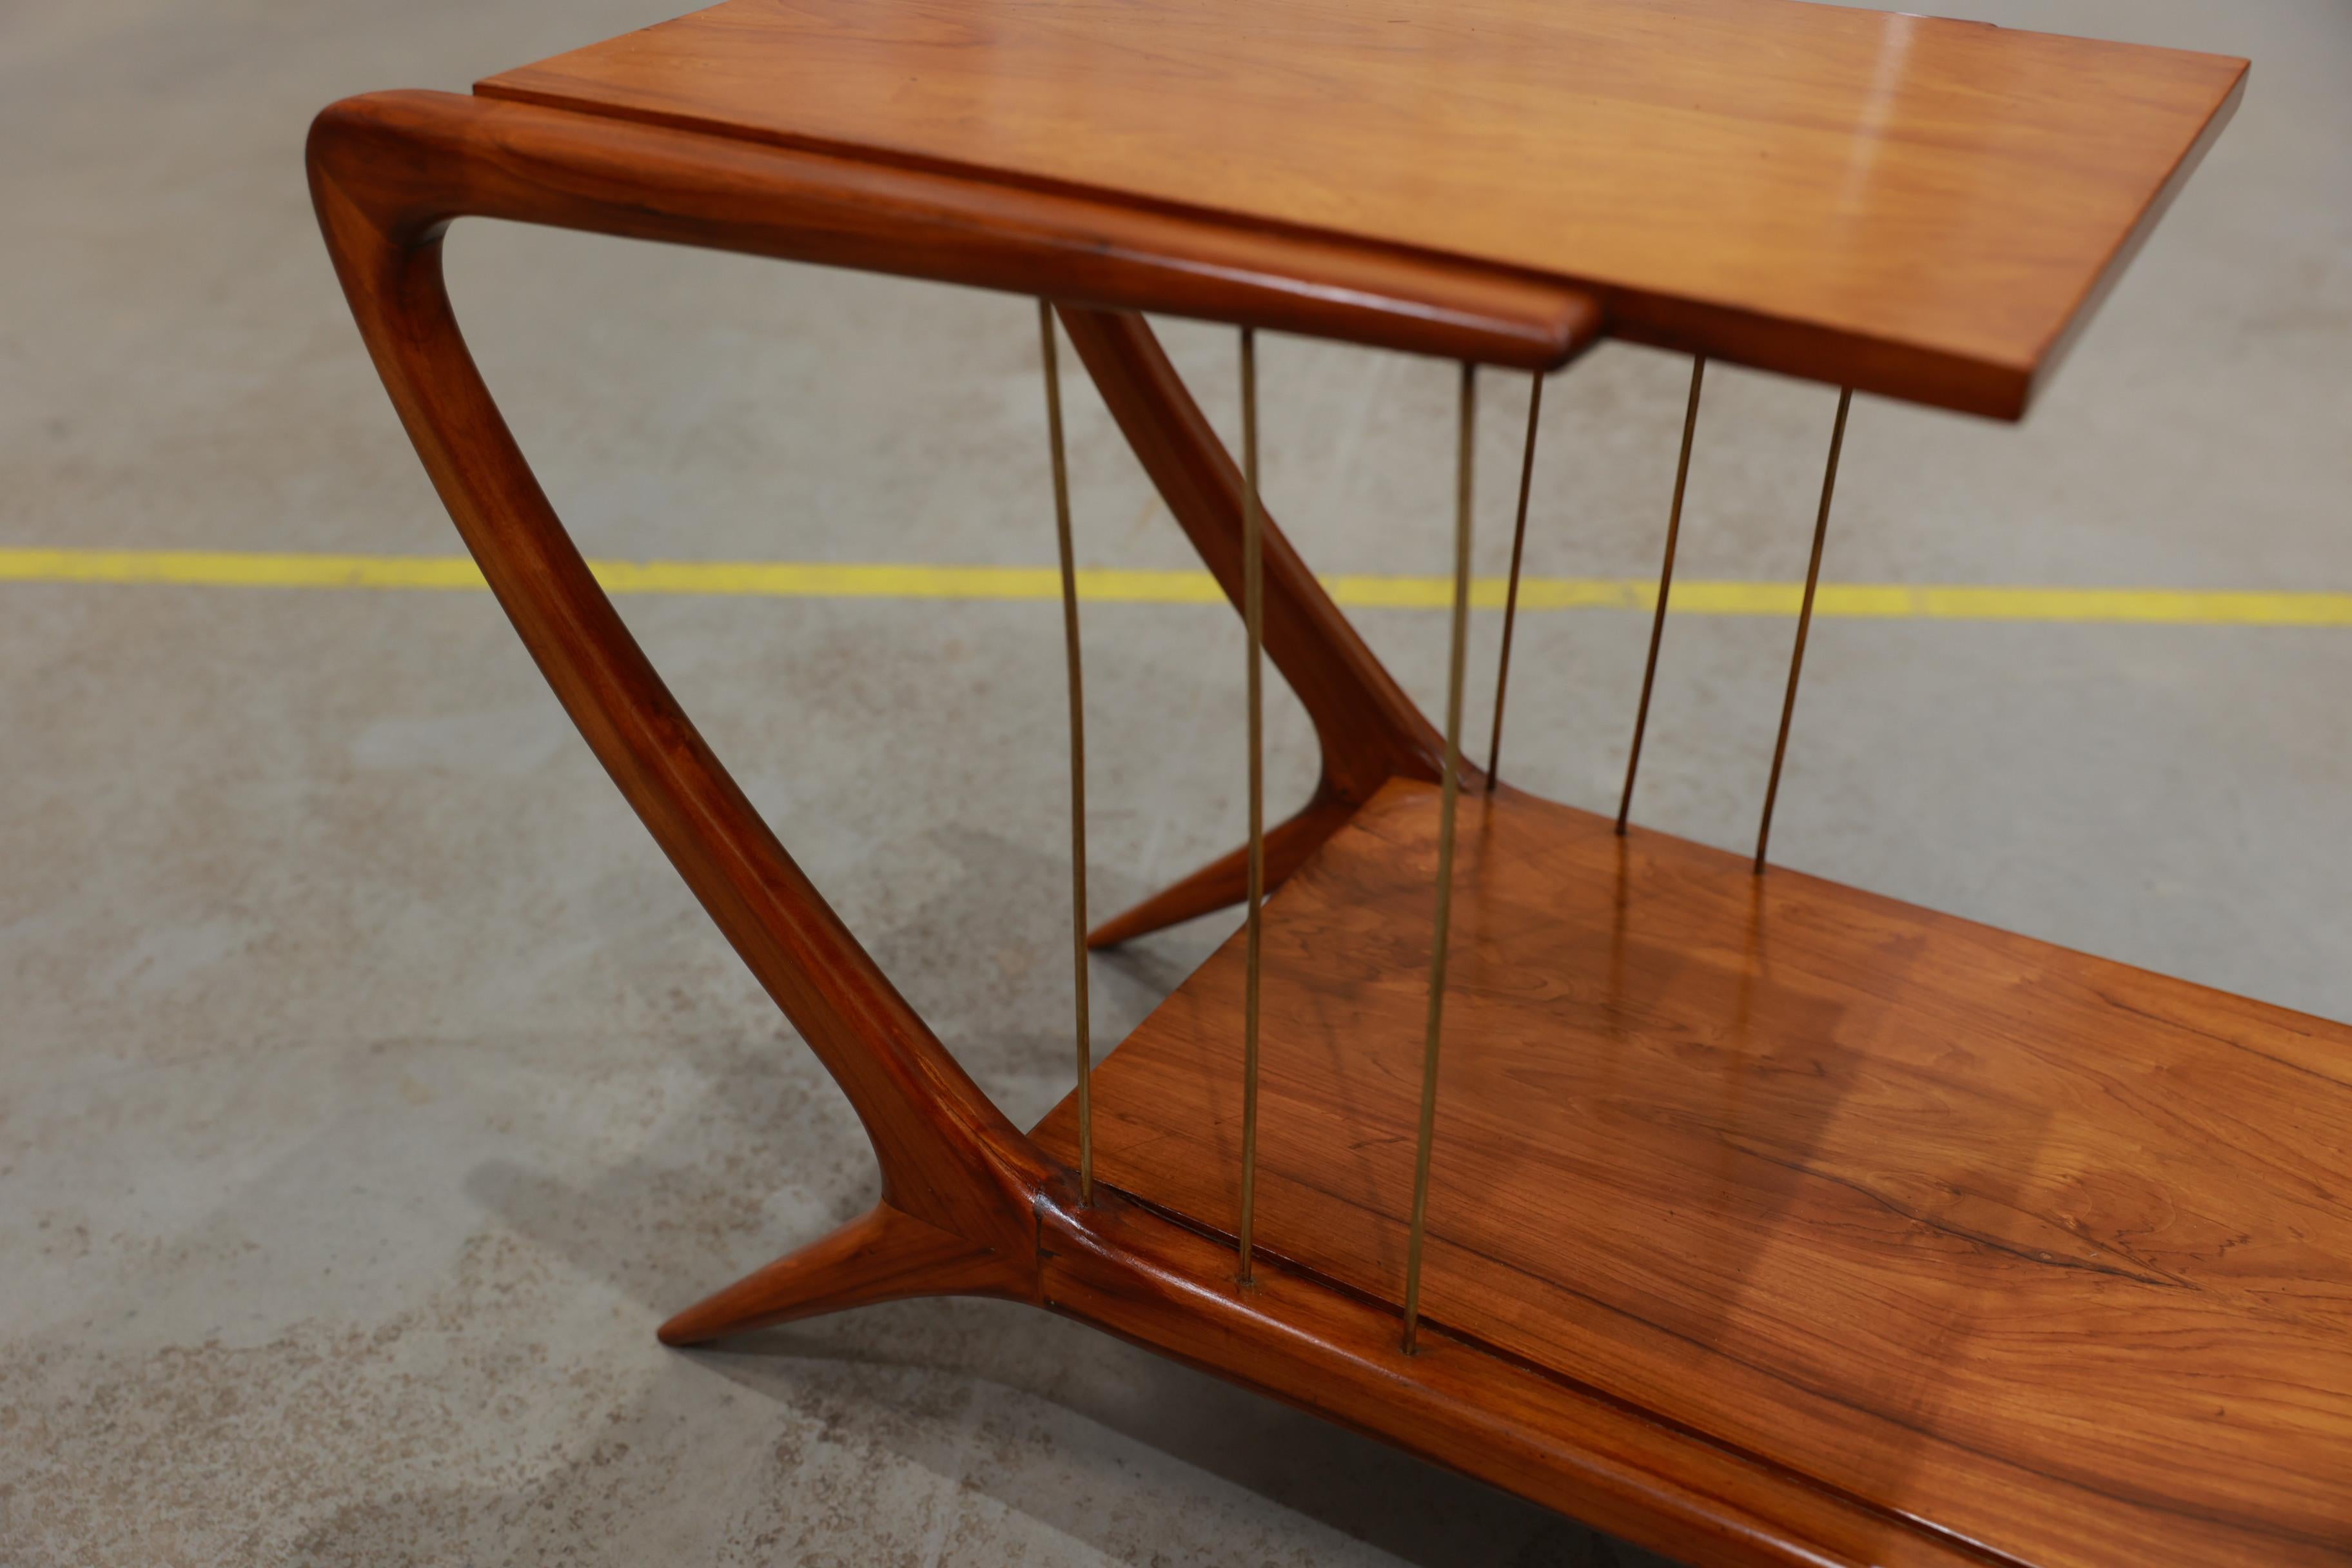 Mid-20th Century Brazilian Modern Side Table in Hardwood by Giuseppe Scapinelli, 1950s, Brazil For Sale